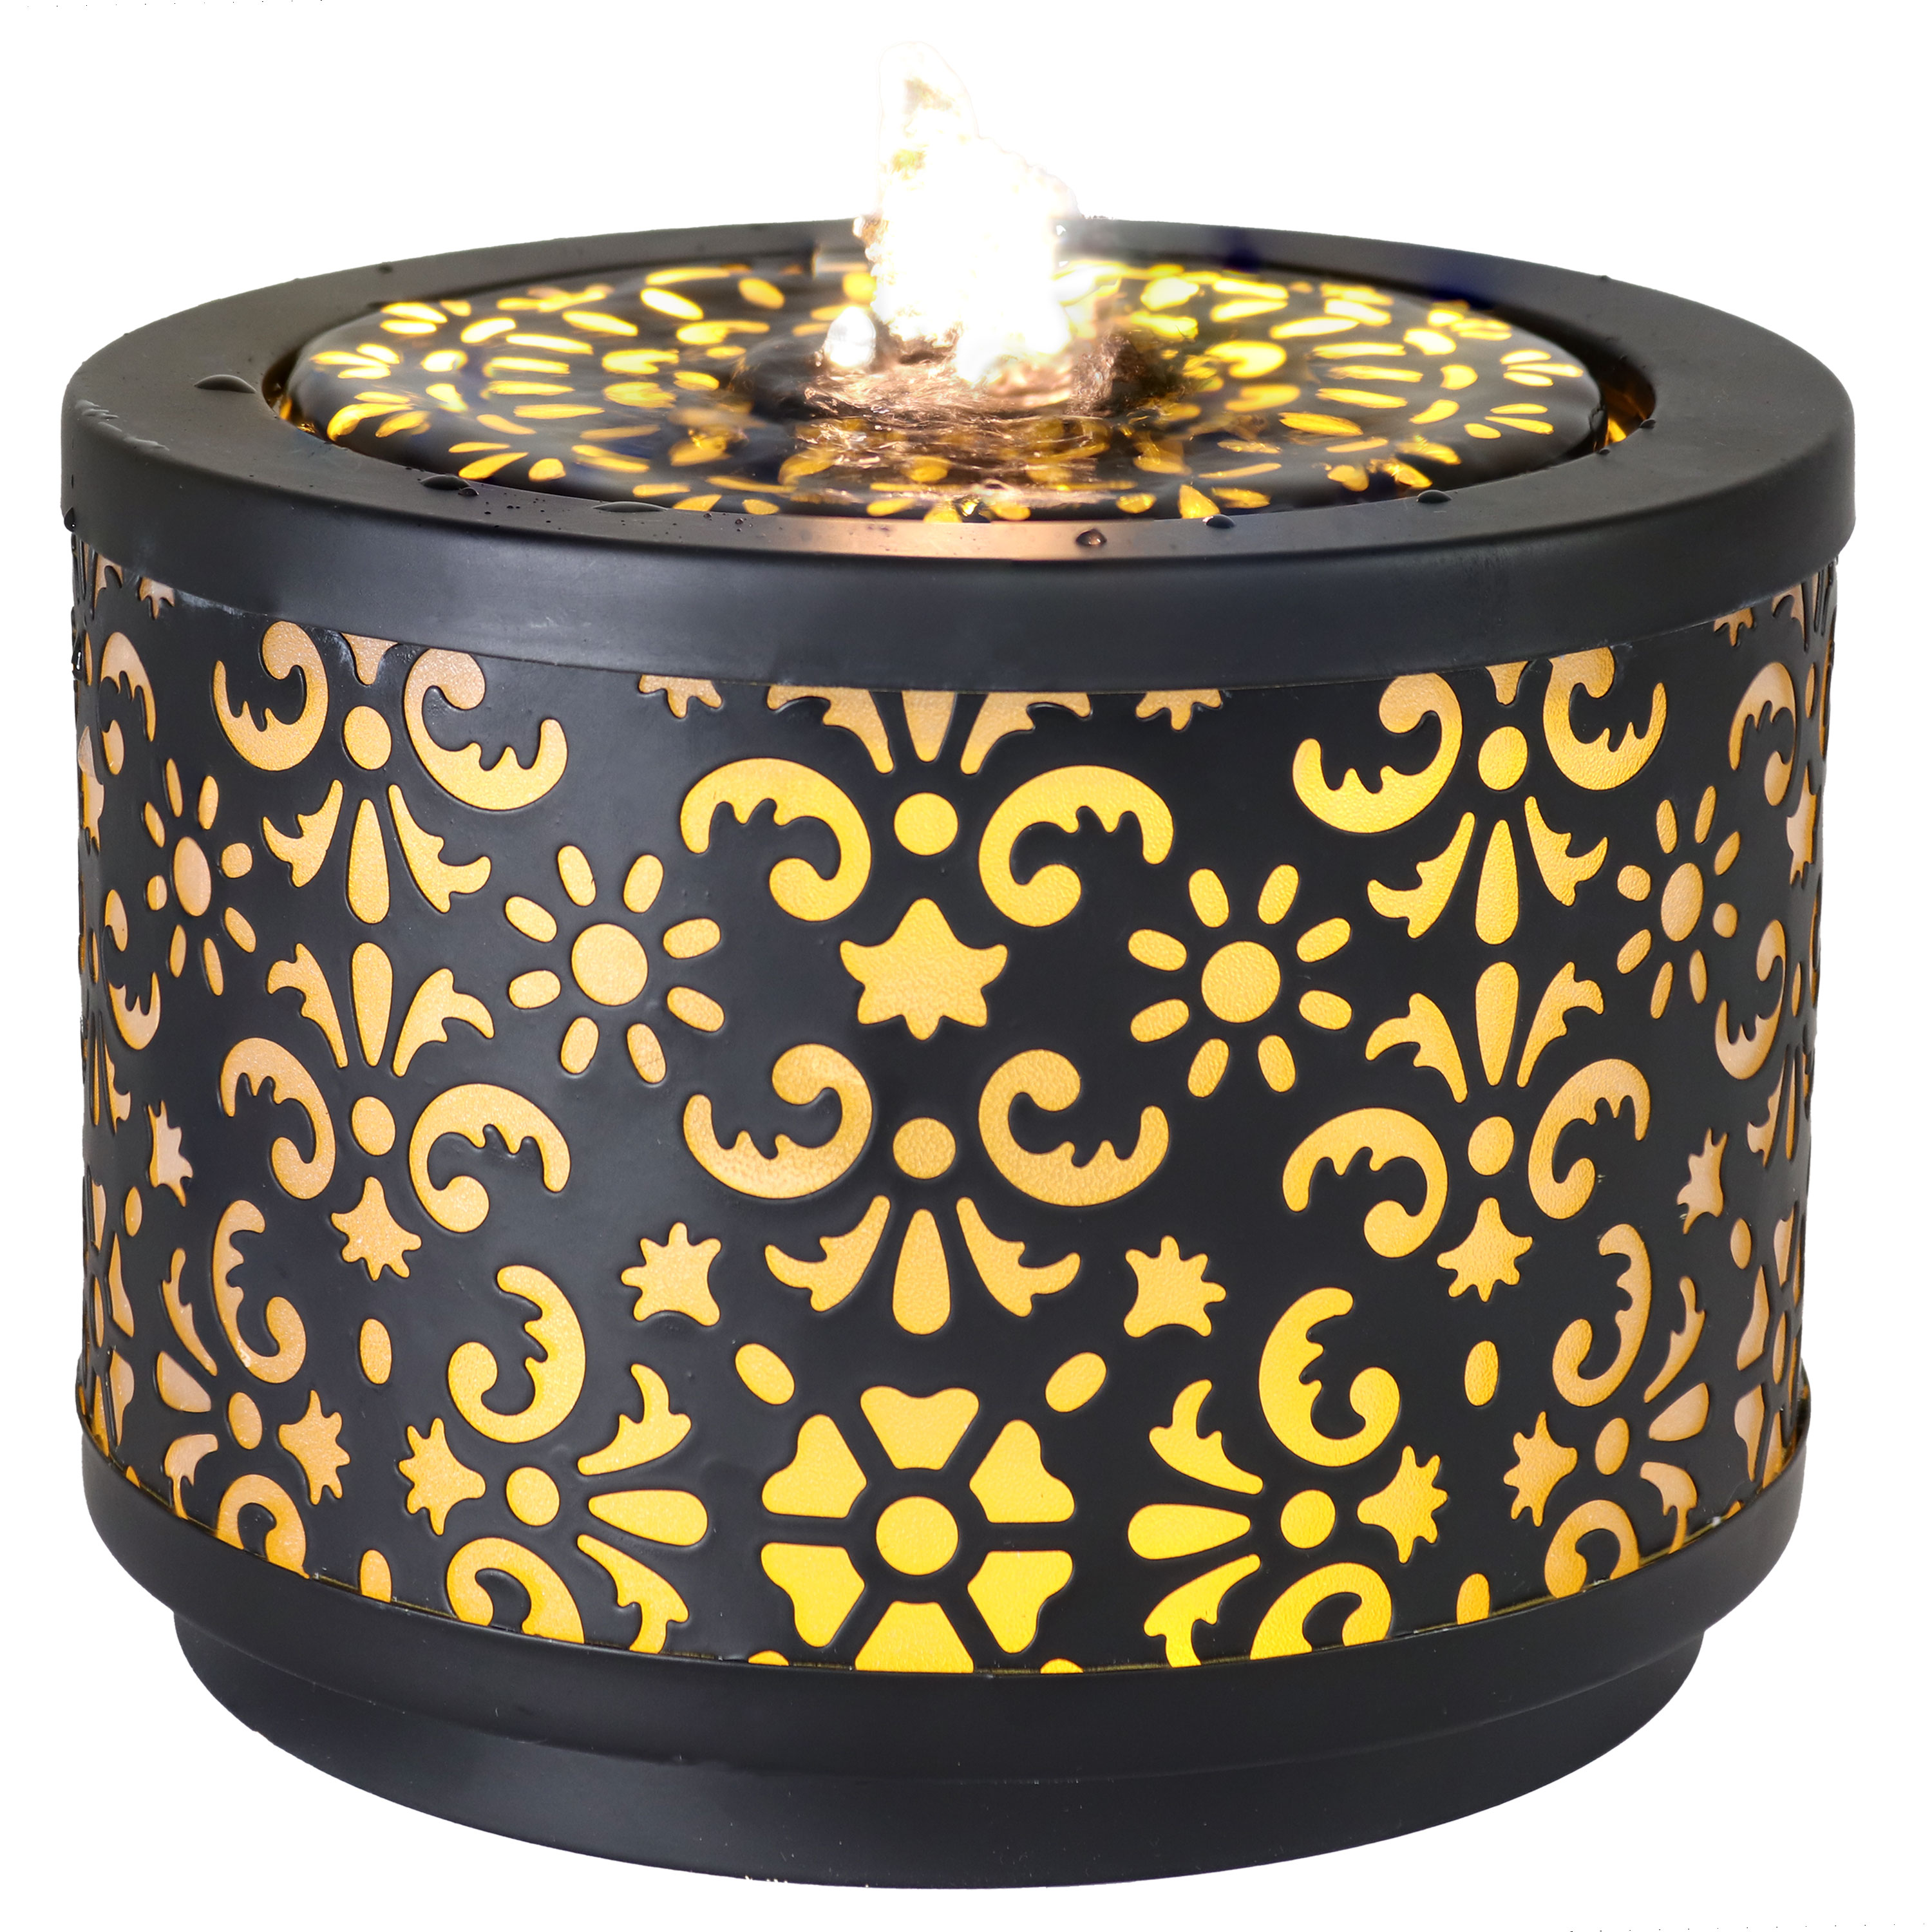 Floral Pattern Cutout Indoor Tabletop Fountain - Black